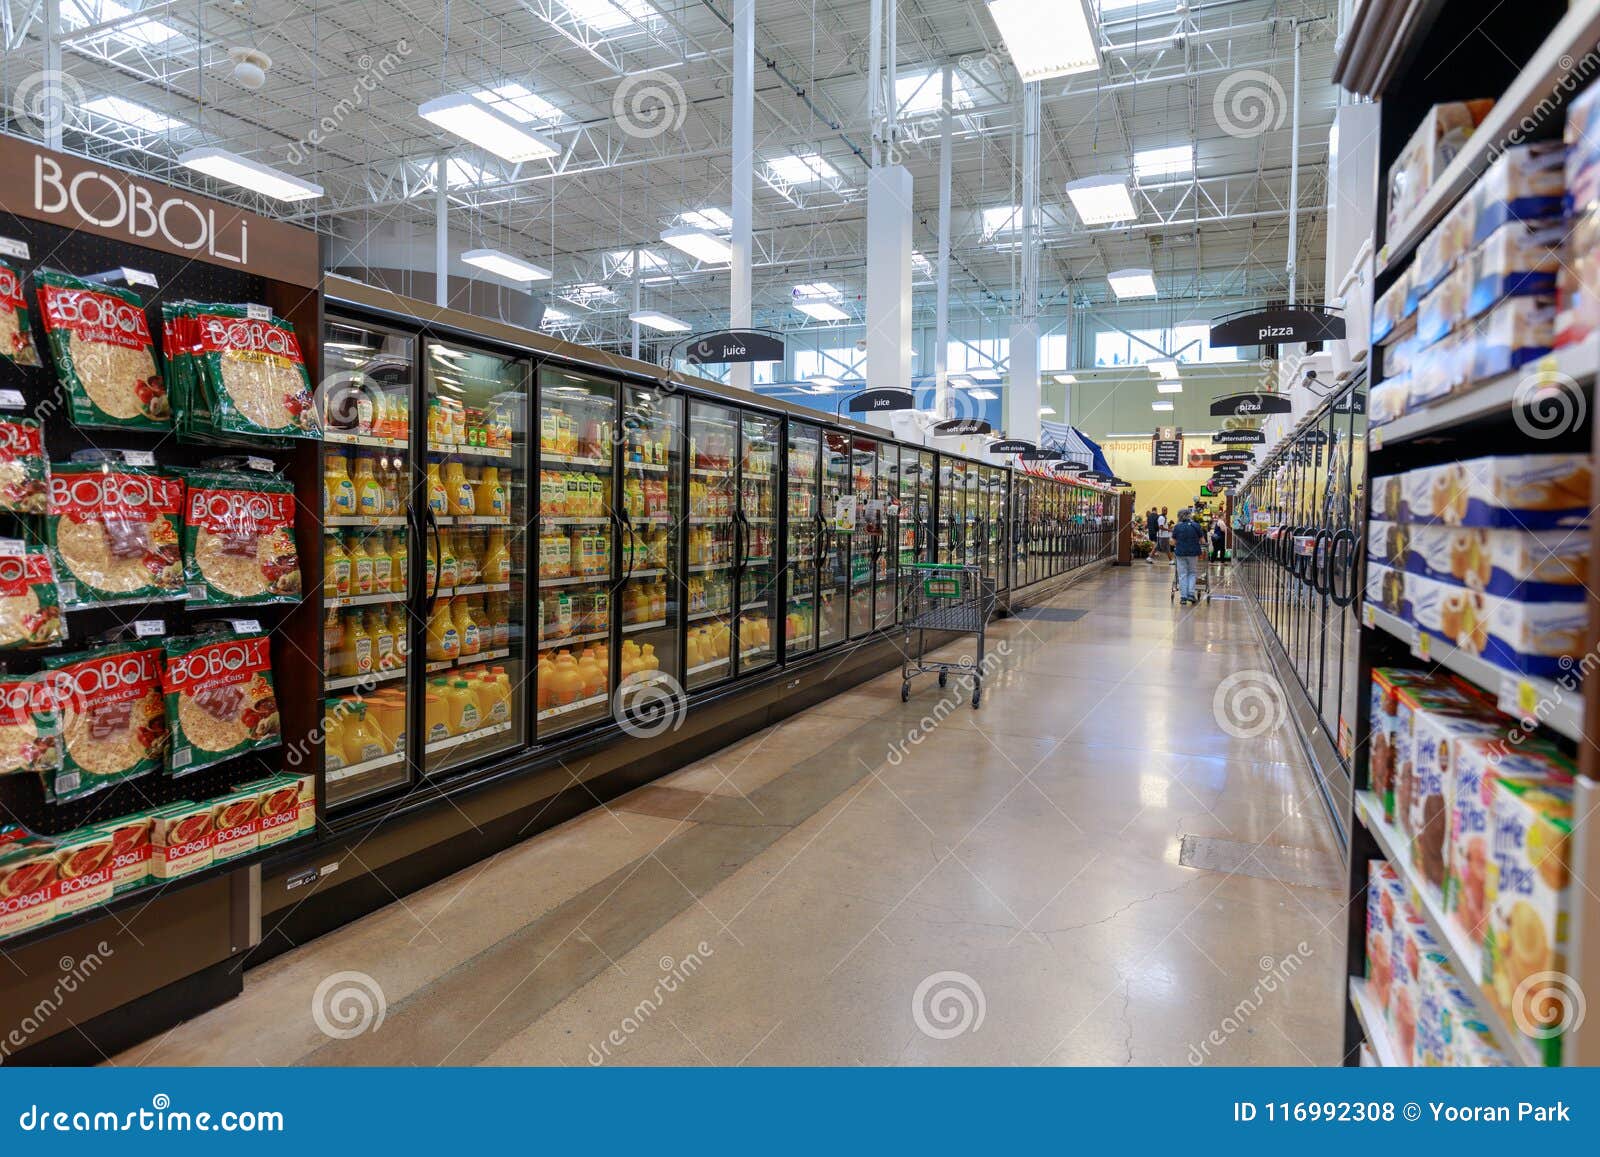 Aisle View Of Fred Meyer Inc Is A Chain Of Hypermarket